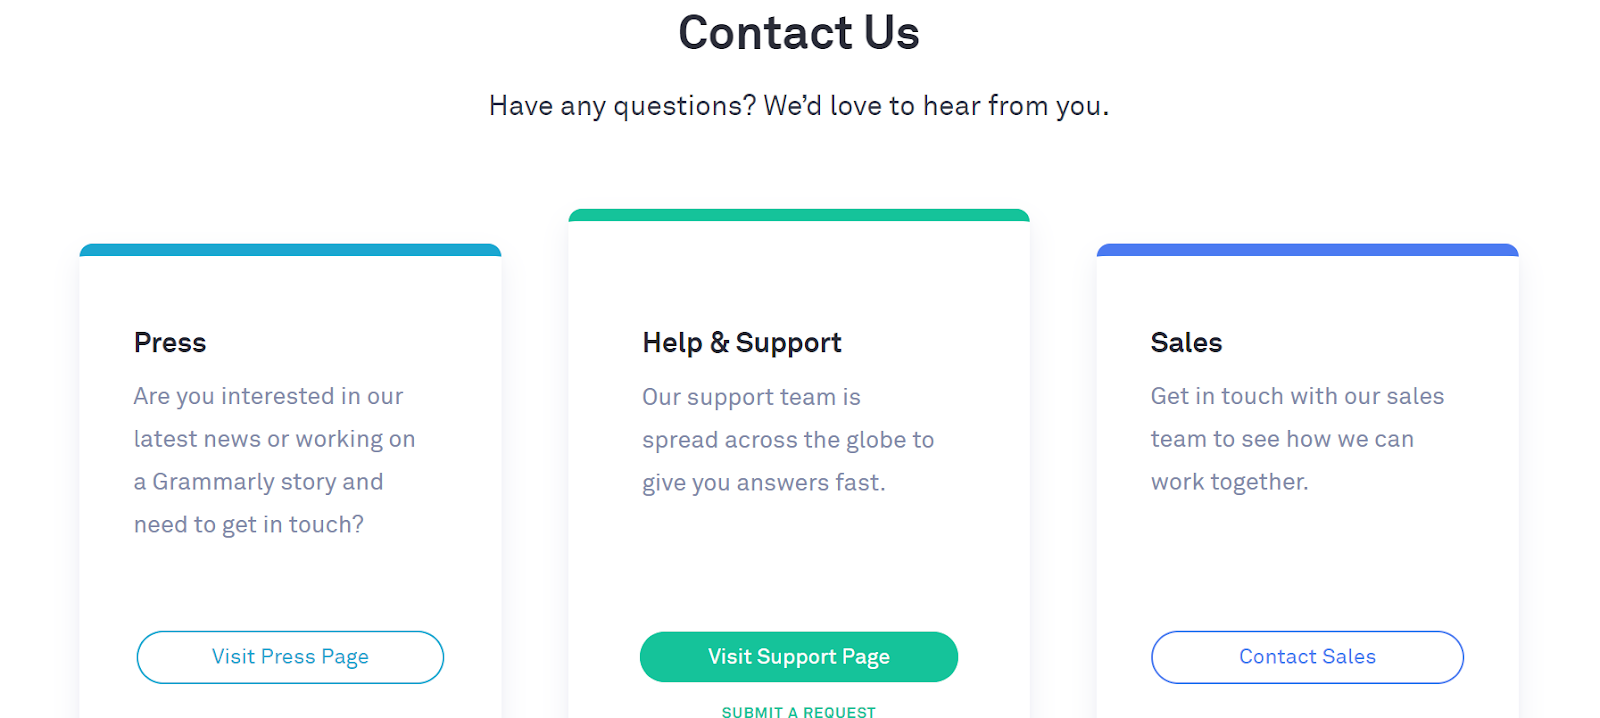 Best Contact Us Pages: Grammarly